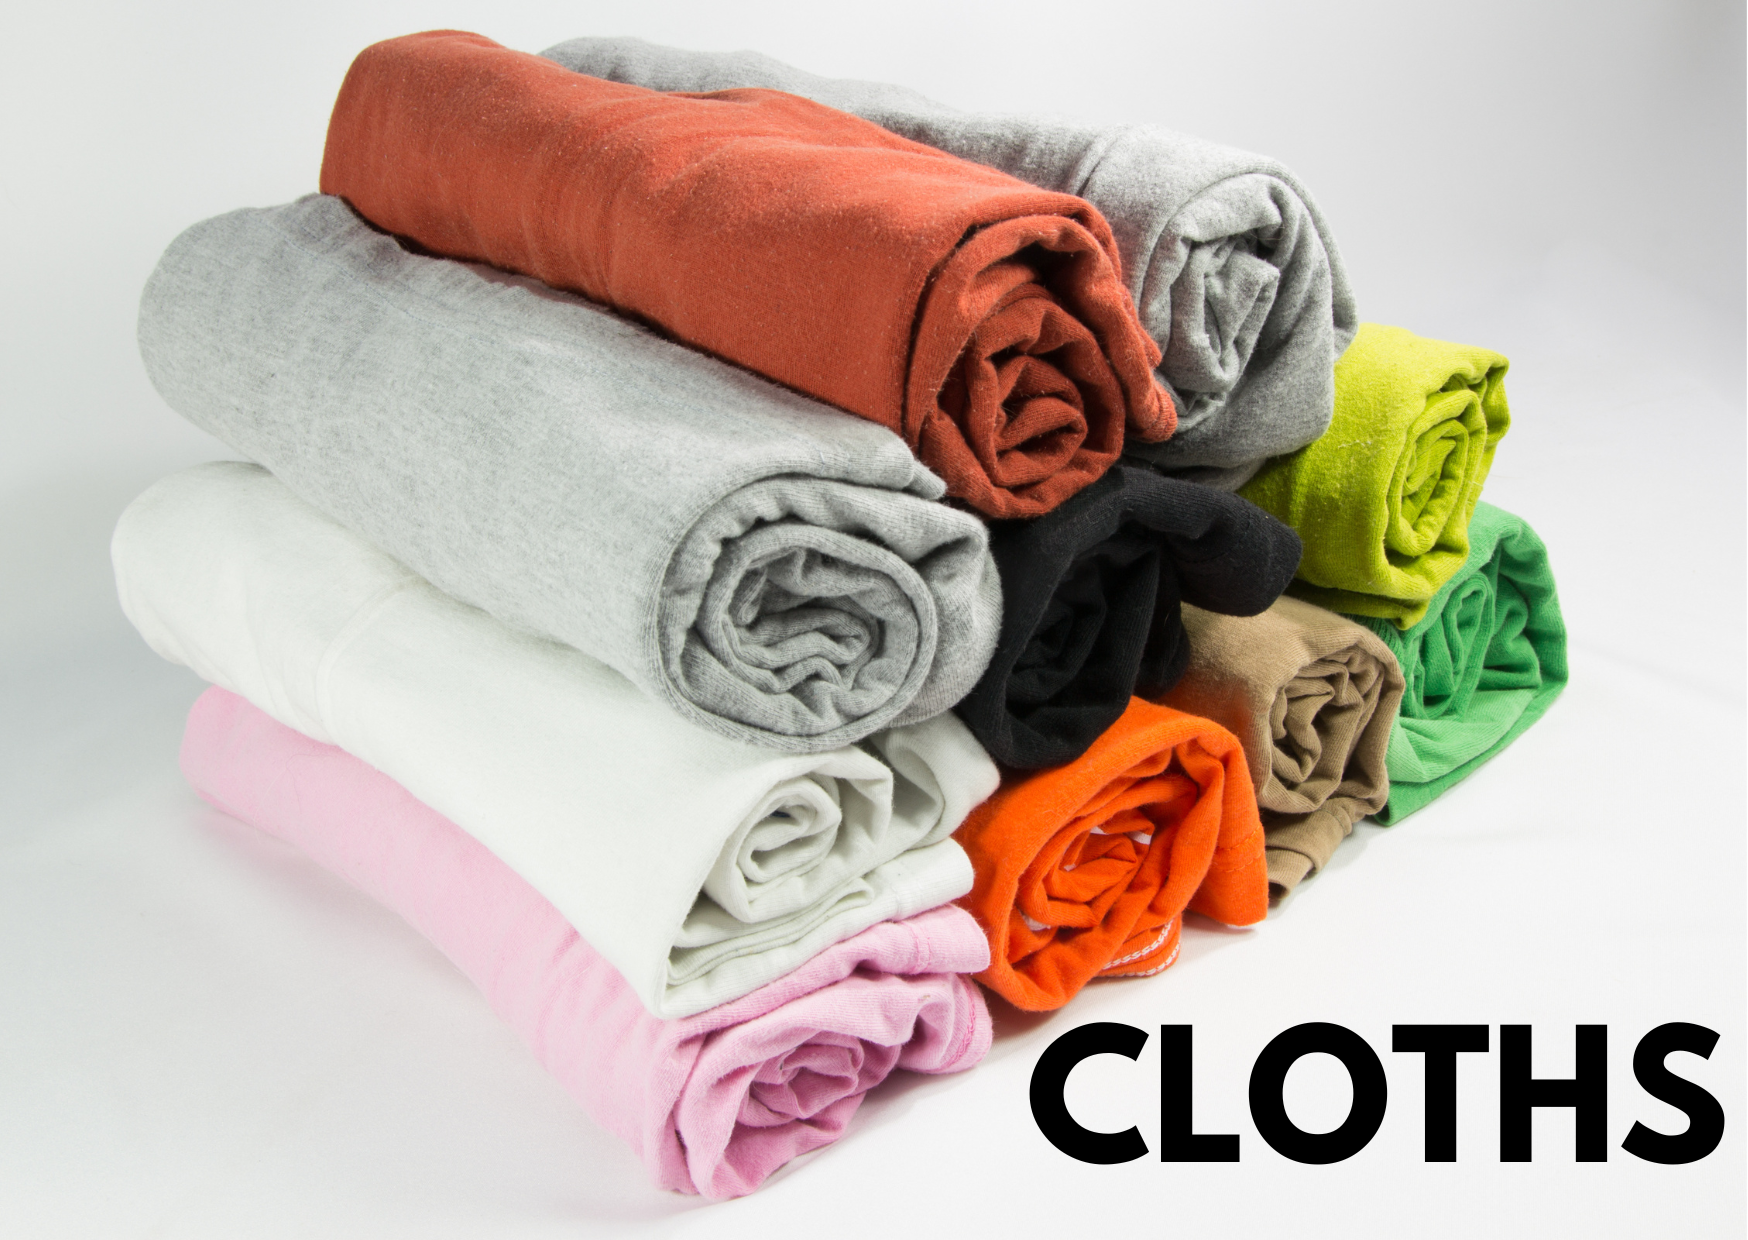 A picture of different coloured cloths and the caption "cloths"